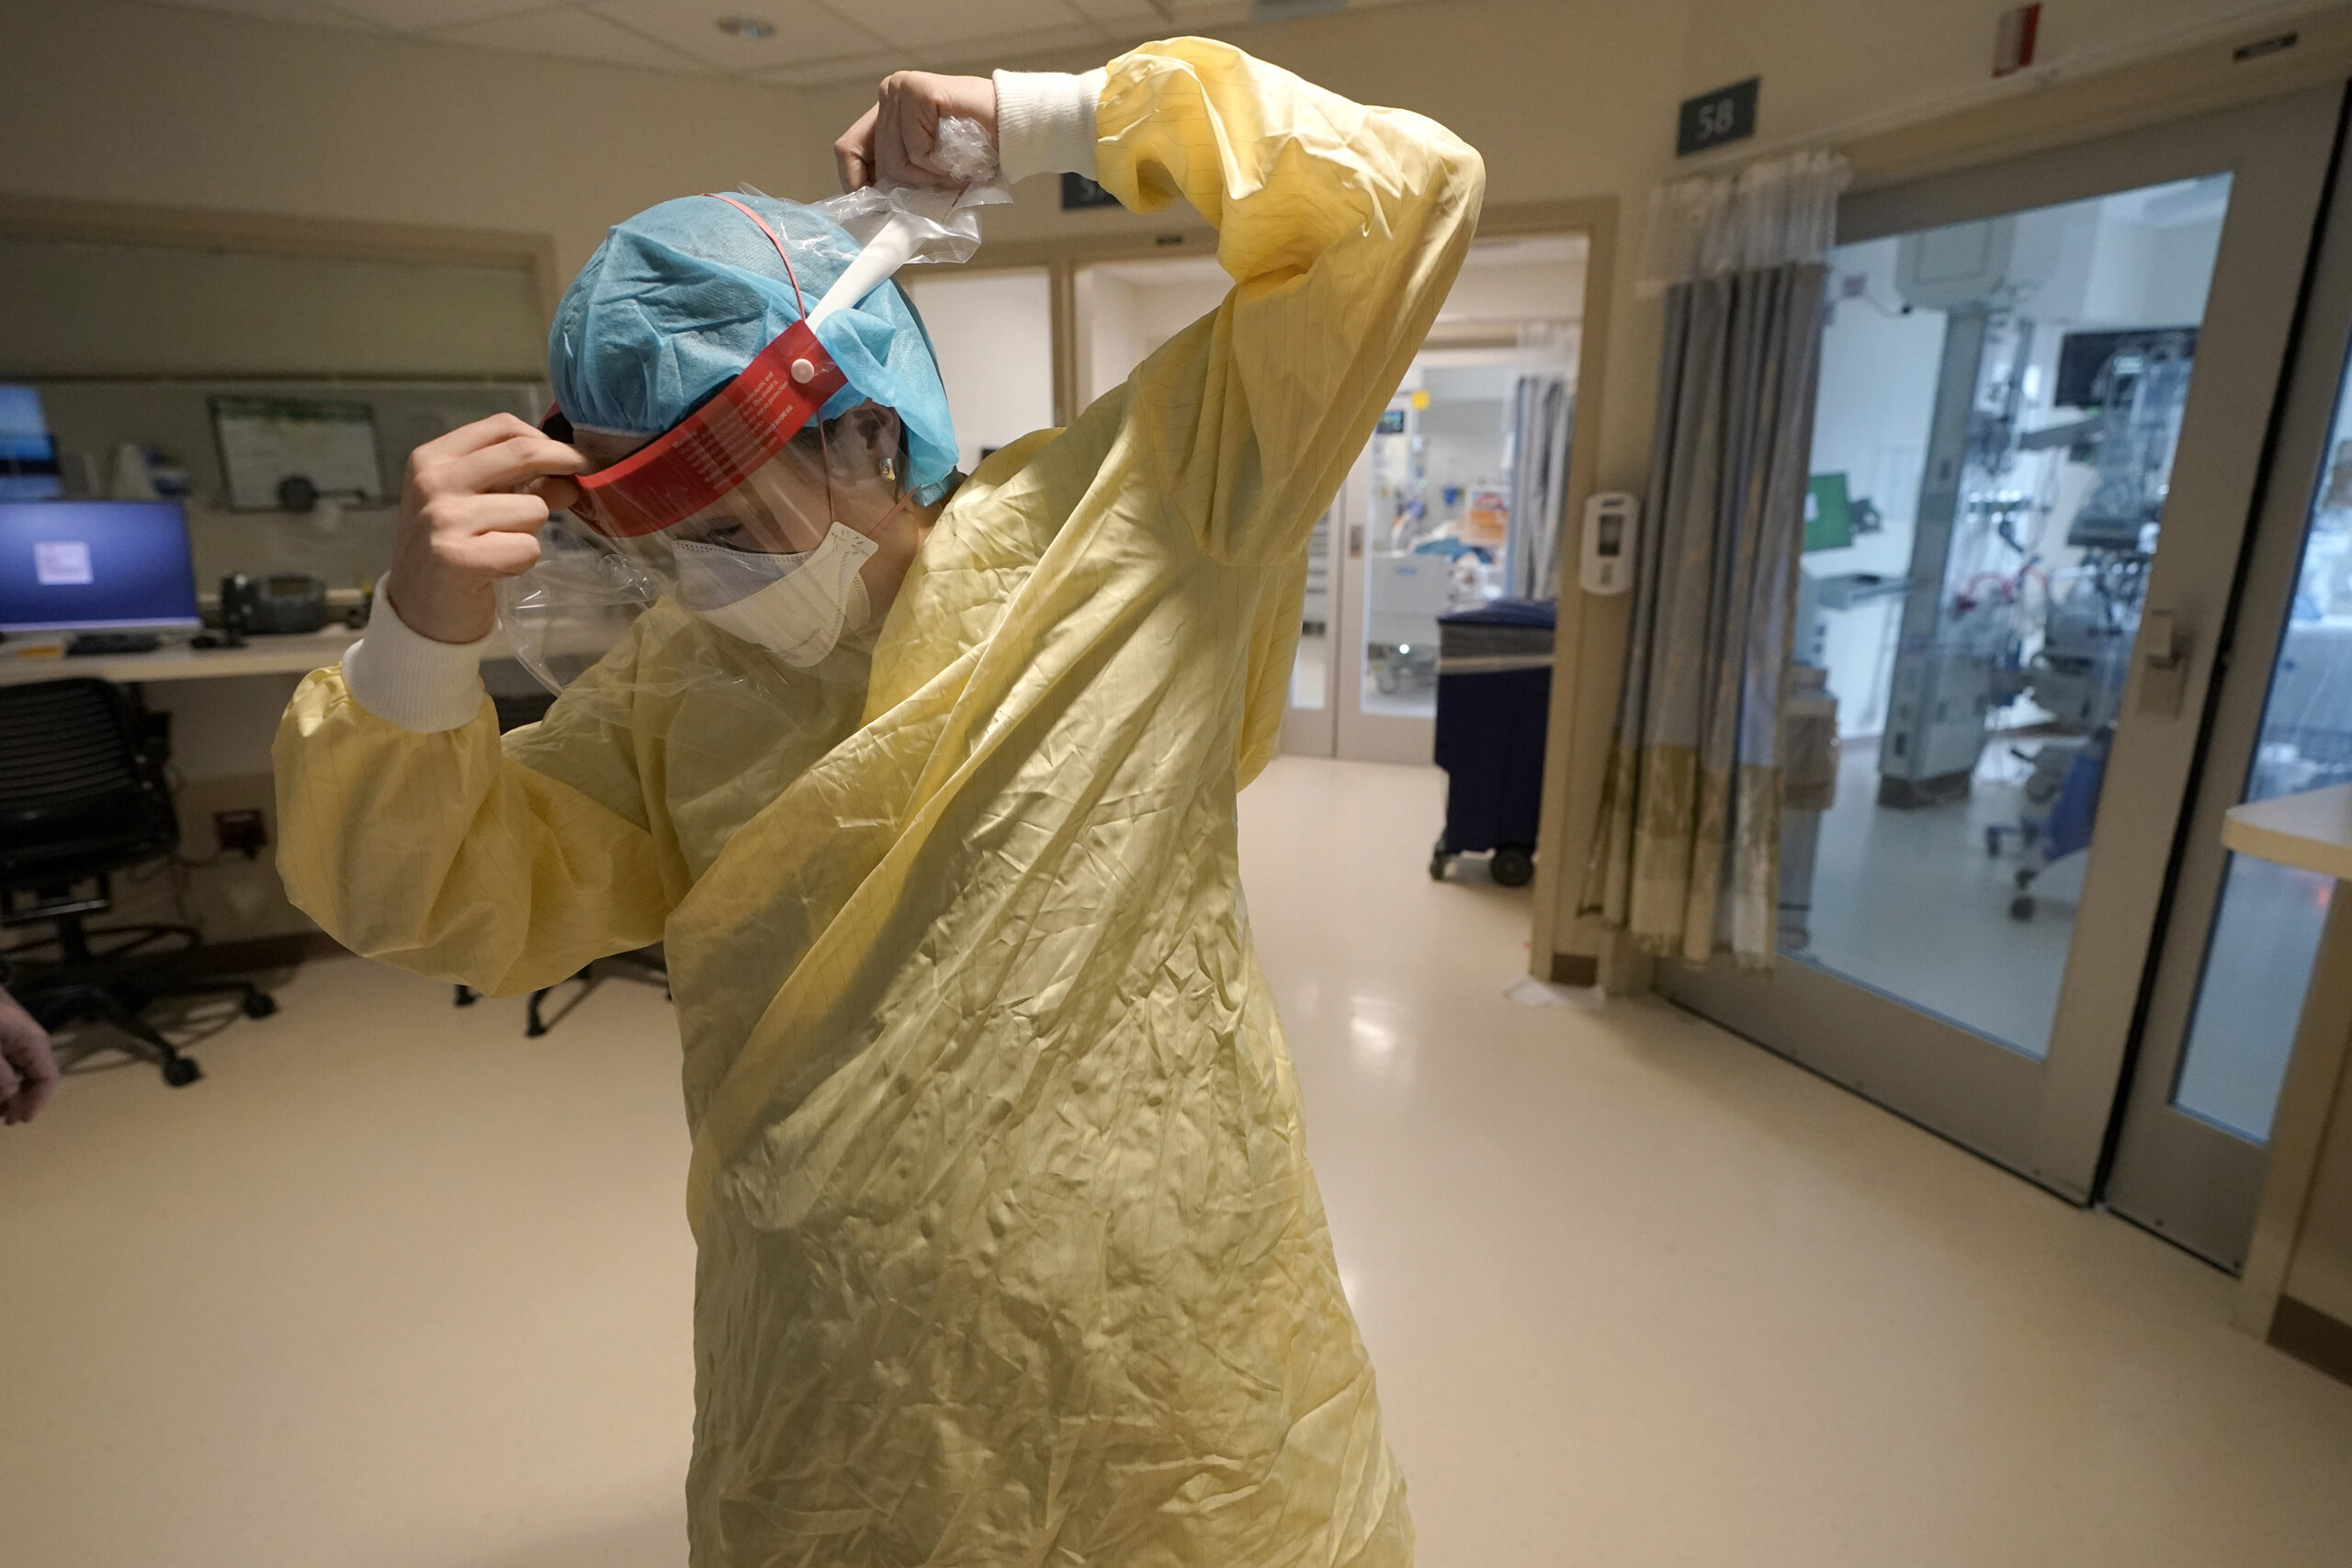 RN Sara Nystrom prepares to enter a patient's room in the COVID-19 Intensive Care Unit